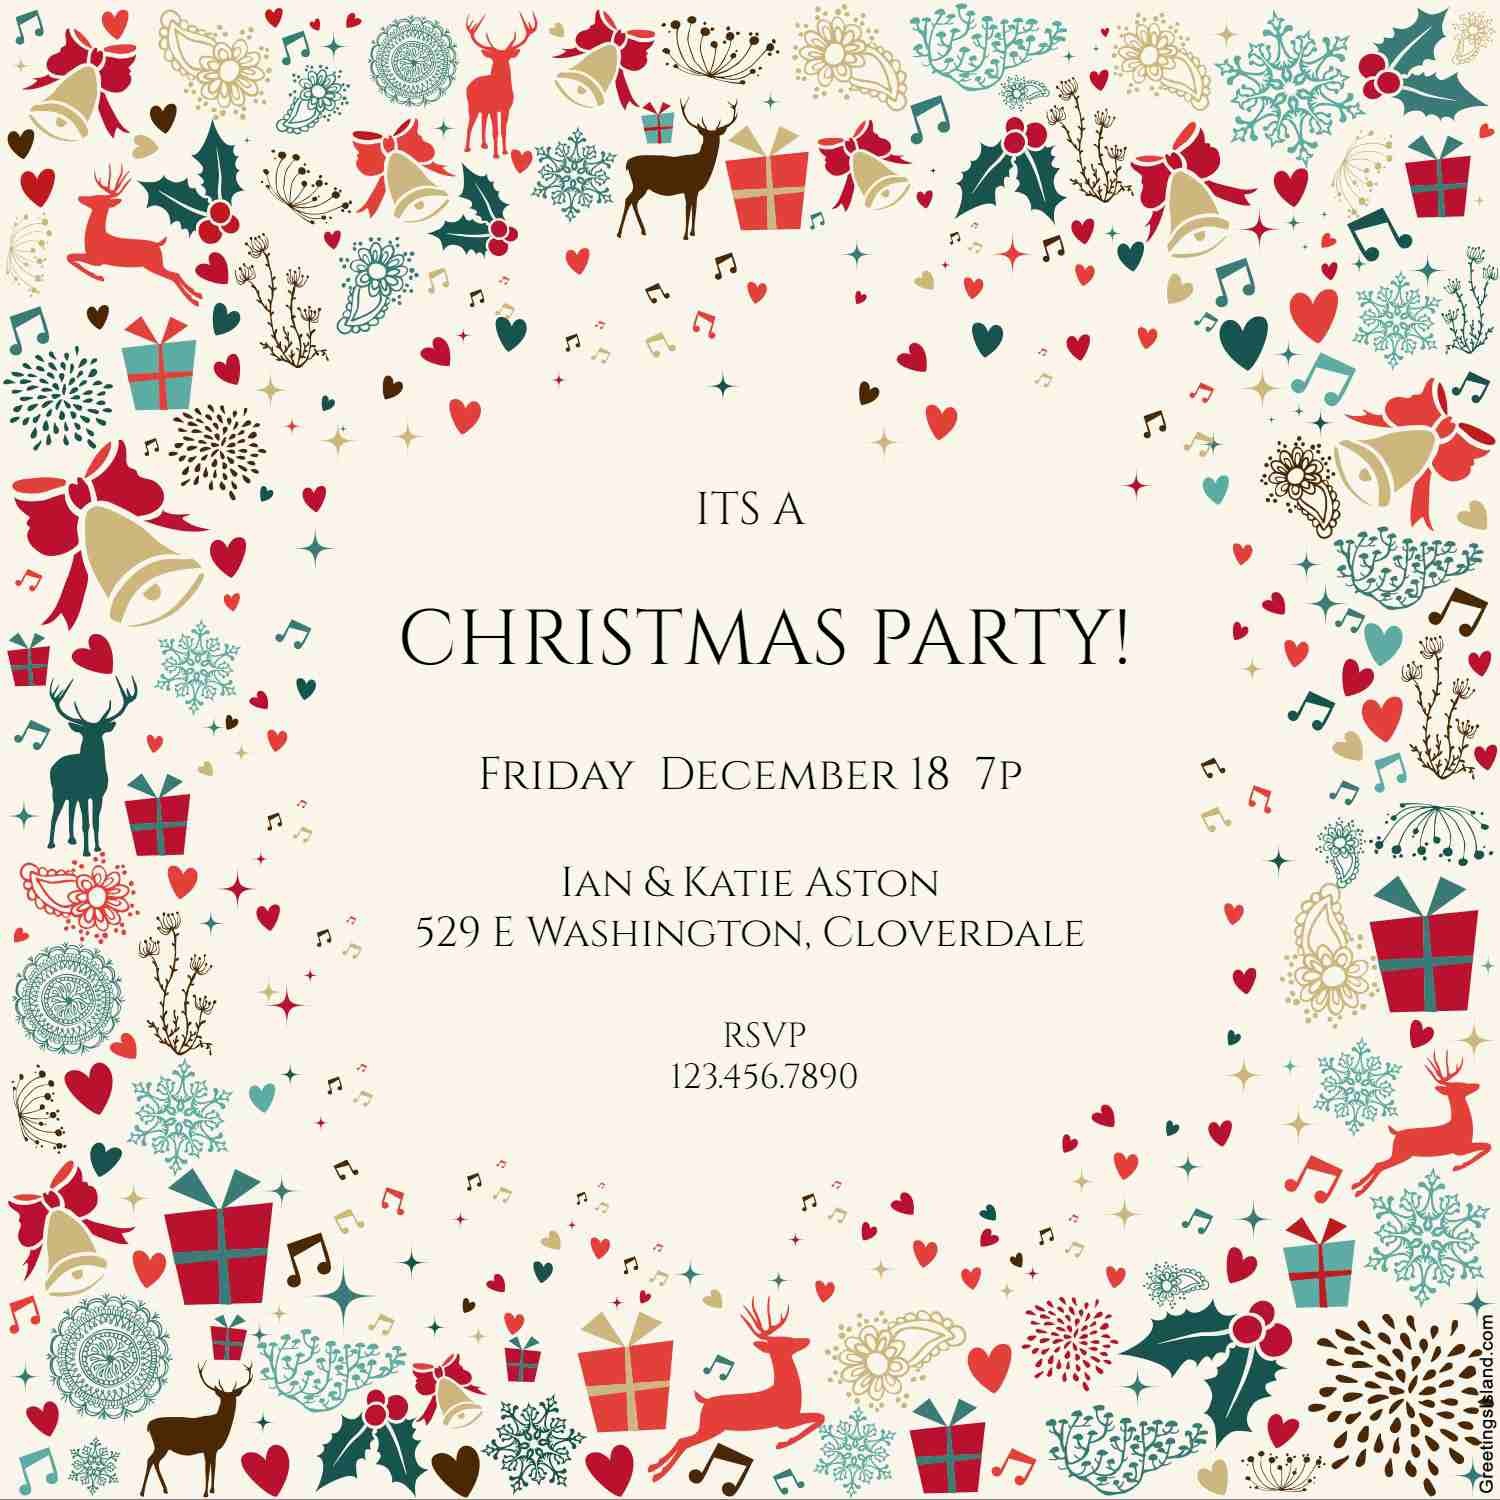 10 Free Christmas Party Invitations That You Can Print Printable